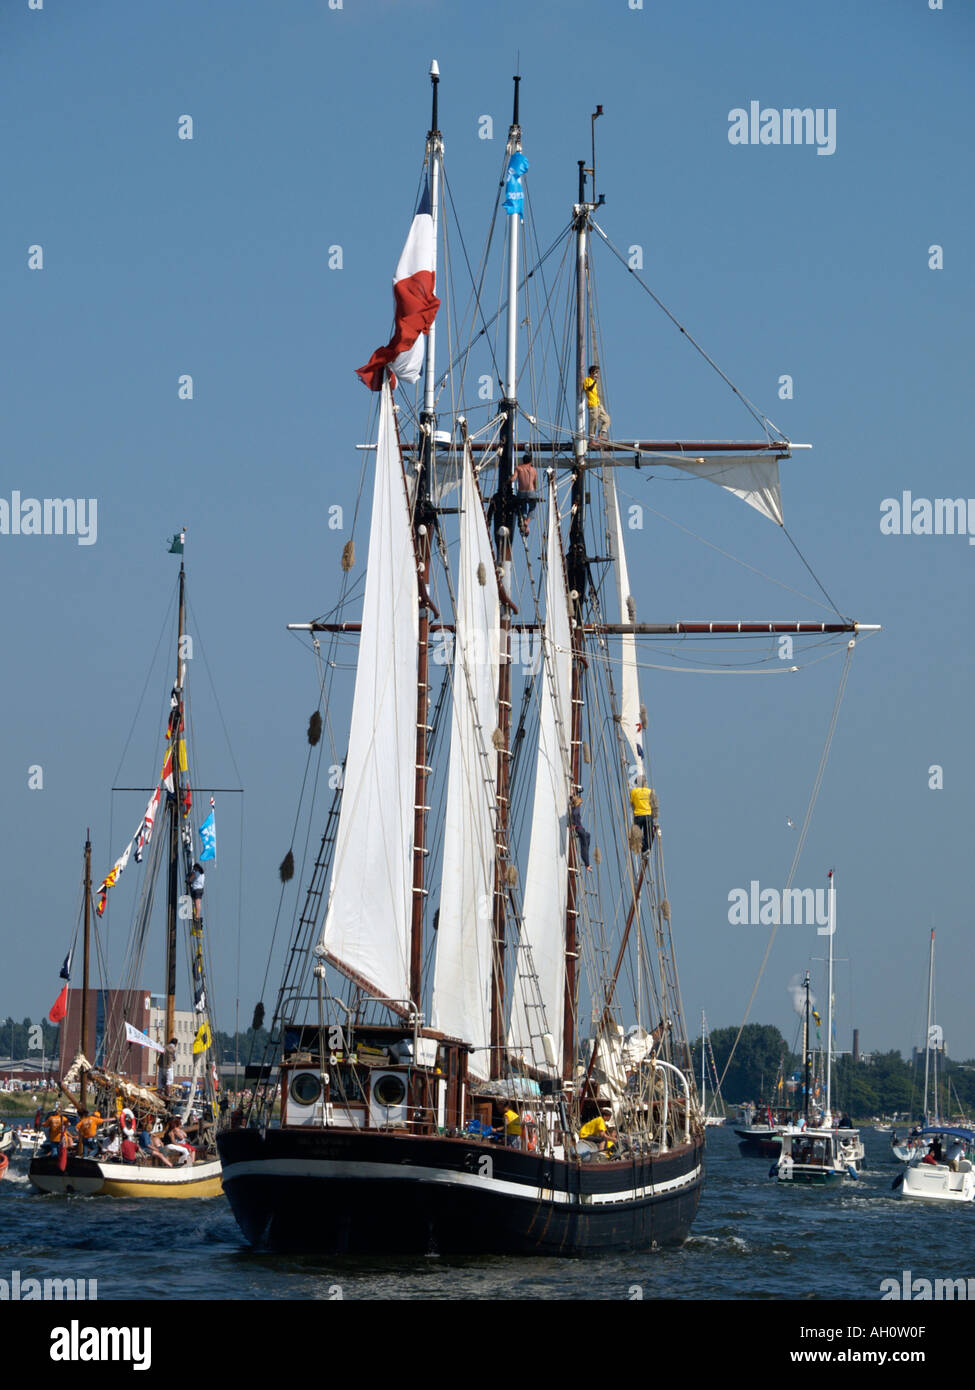 French topsail schooner Bel Espoir II arriving in Amsterdam for the Sail Amsterdam 2005 tall ship event Stock Photo